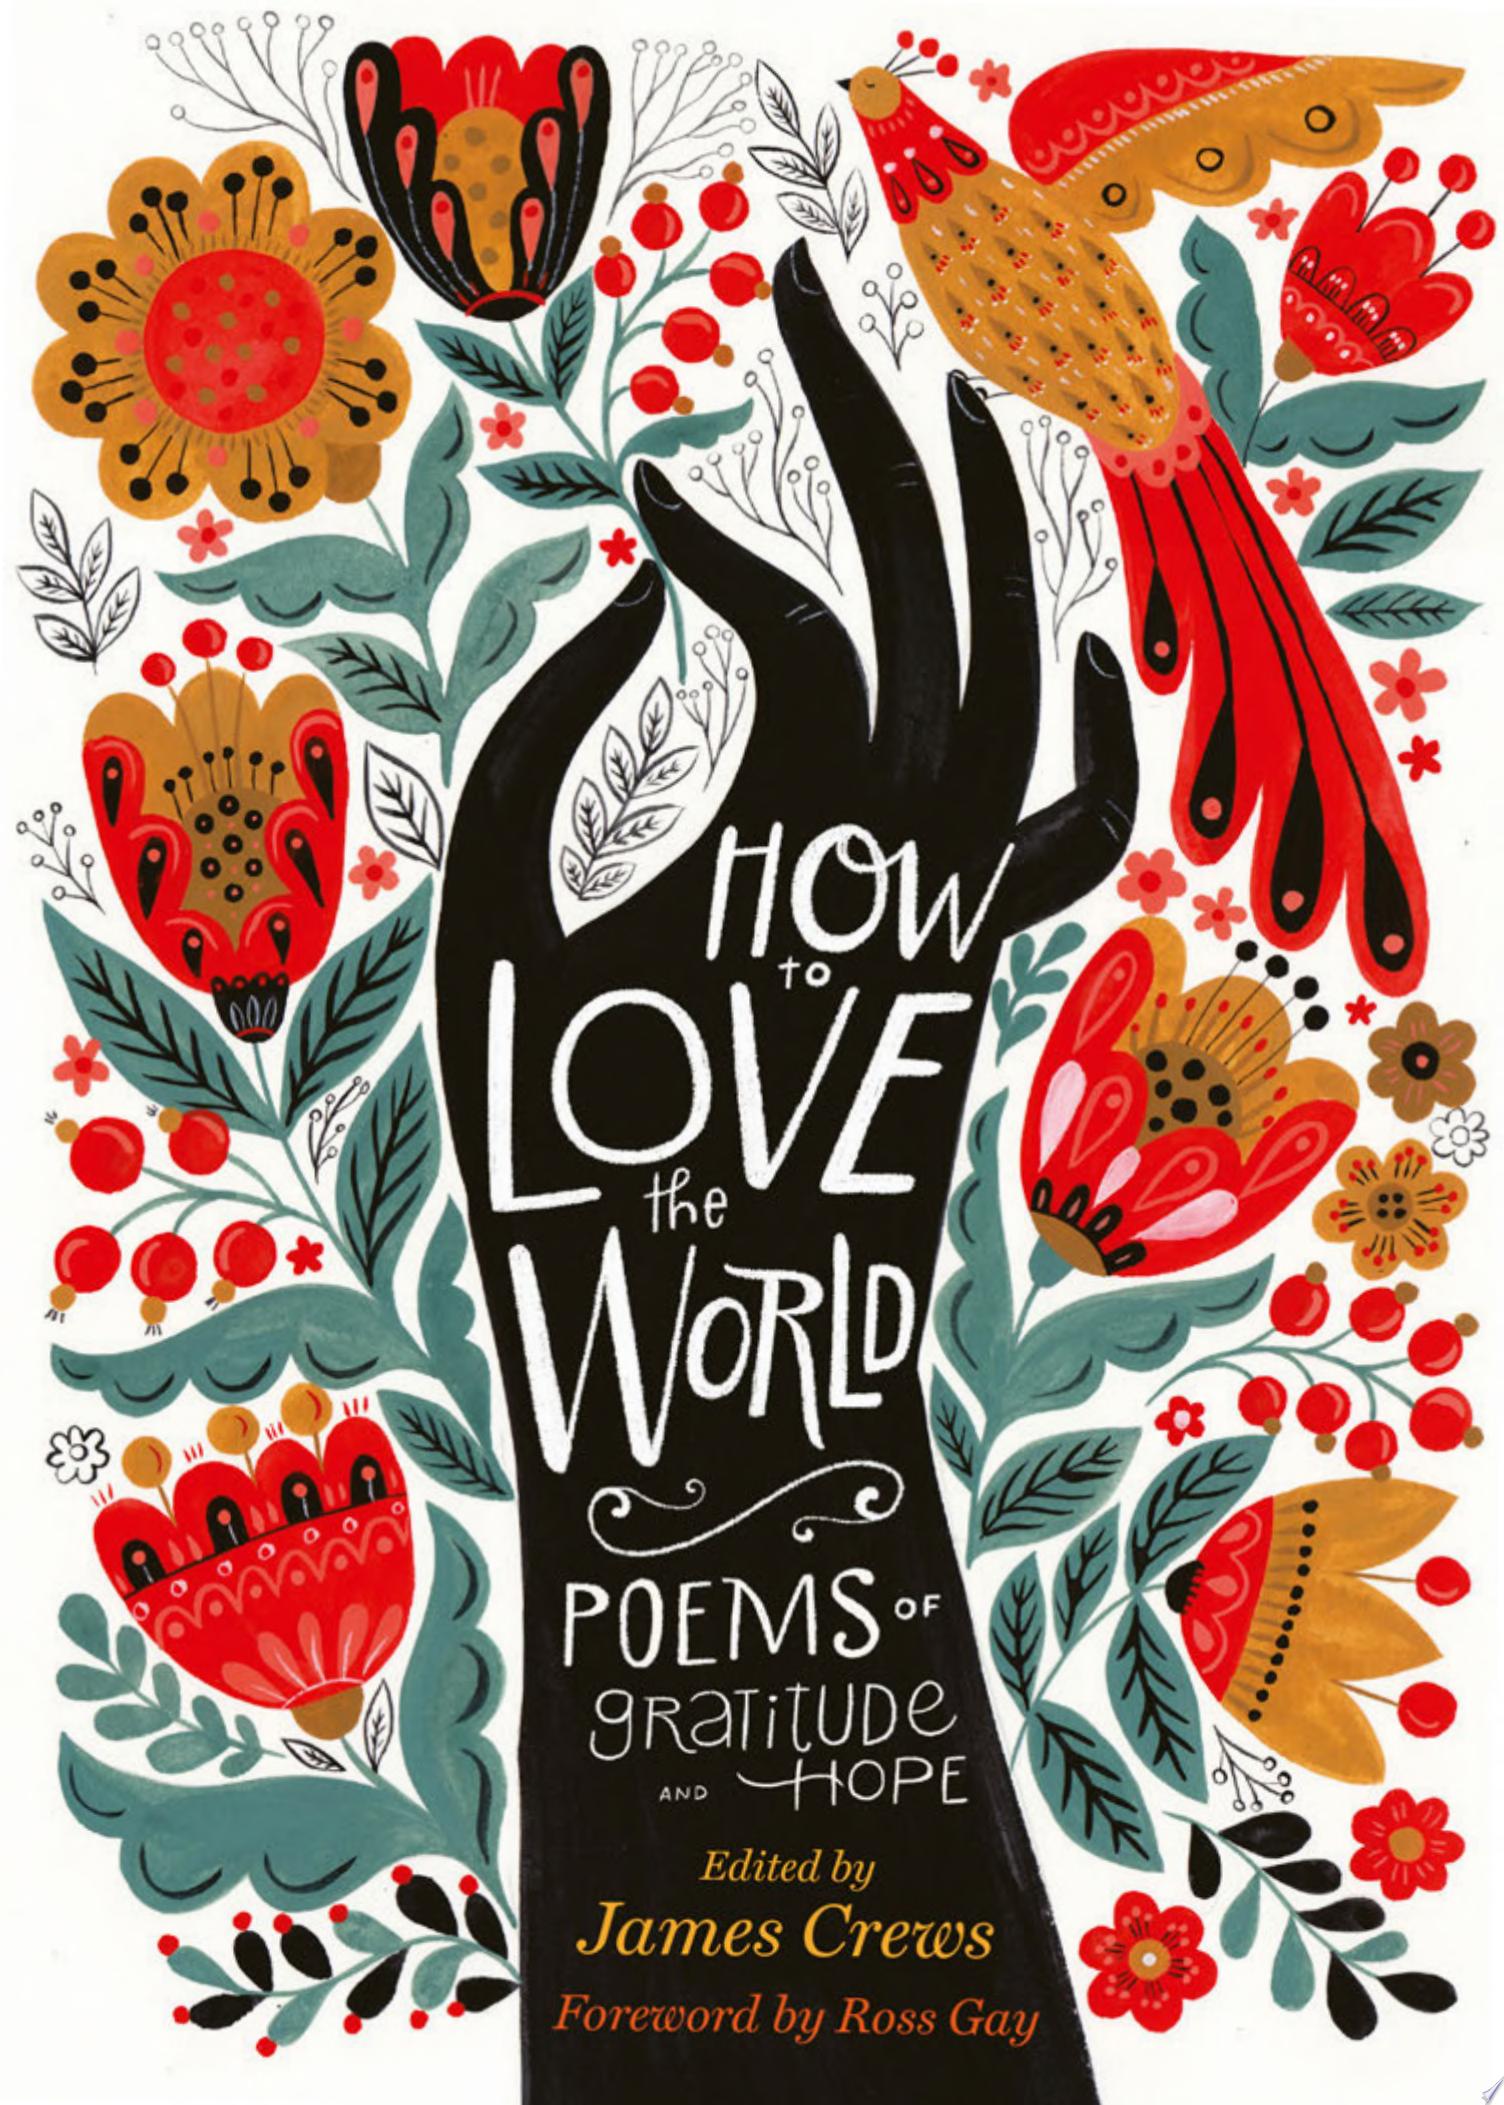 Image for "How to Love the World"